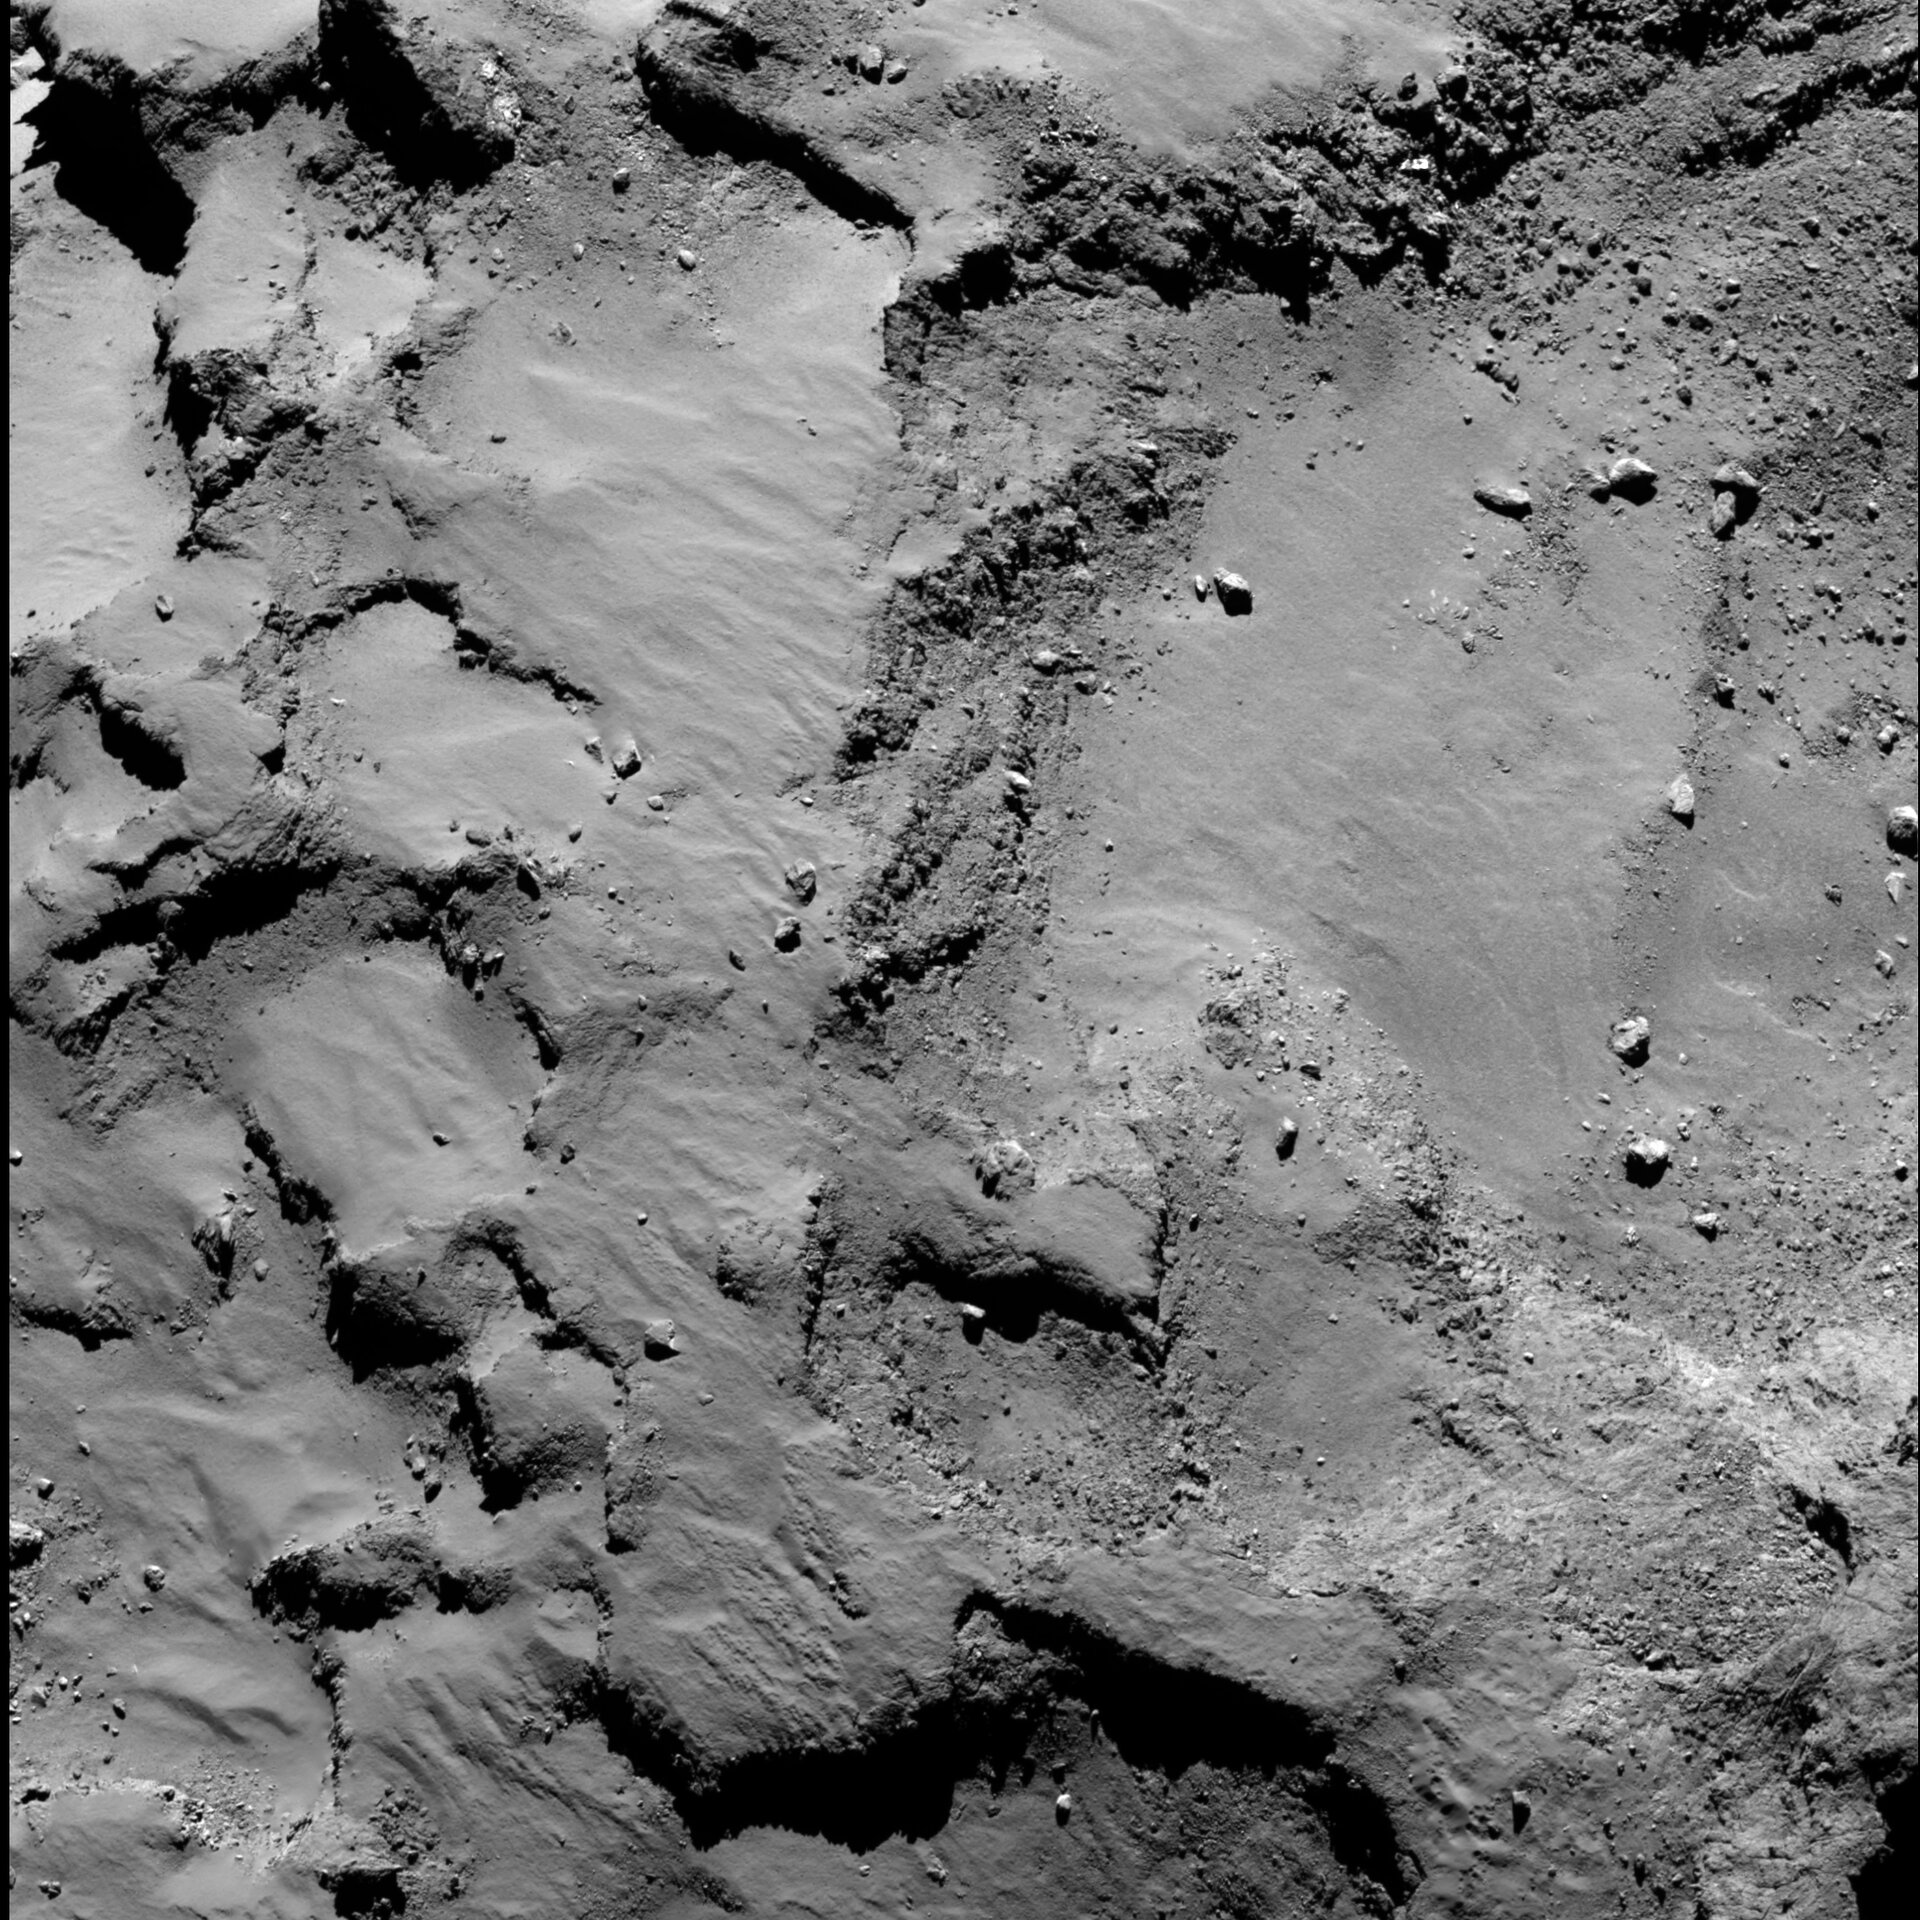 Philae’s primary landing site from 30 km (a)